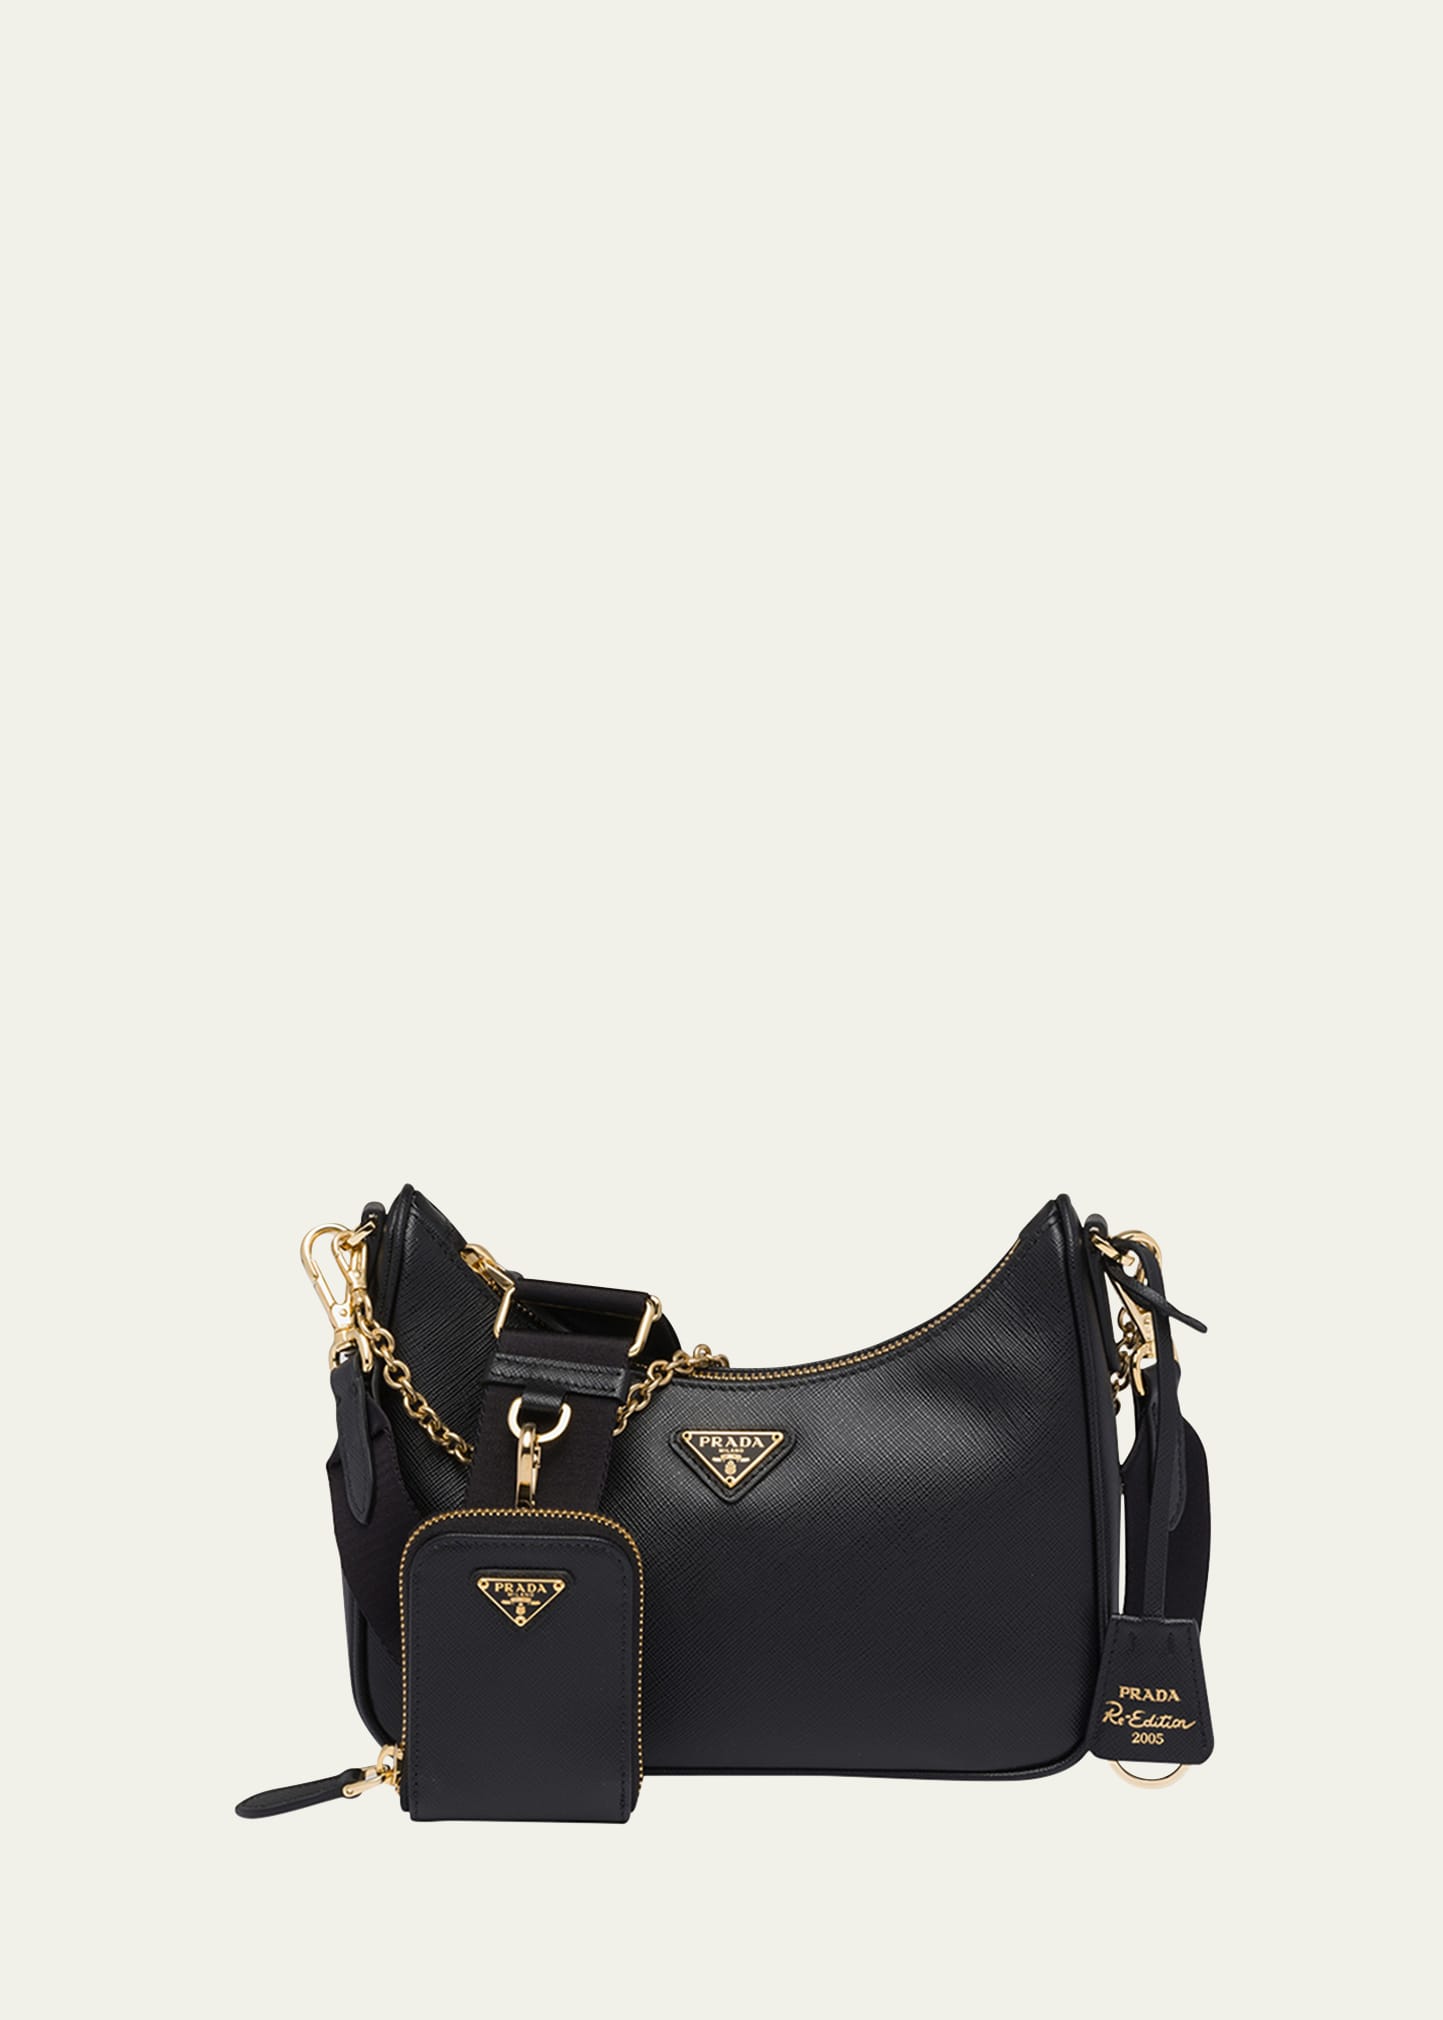 Prada Re-Edition 1995 Quilted Chain Shoulder Bag - Bergdorf Goodman